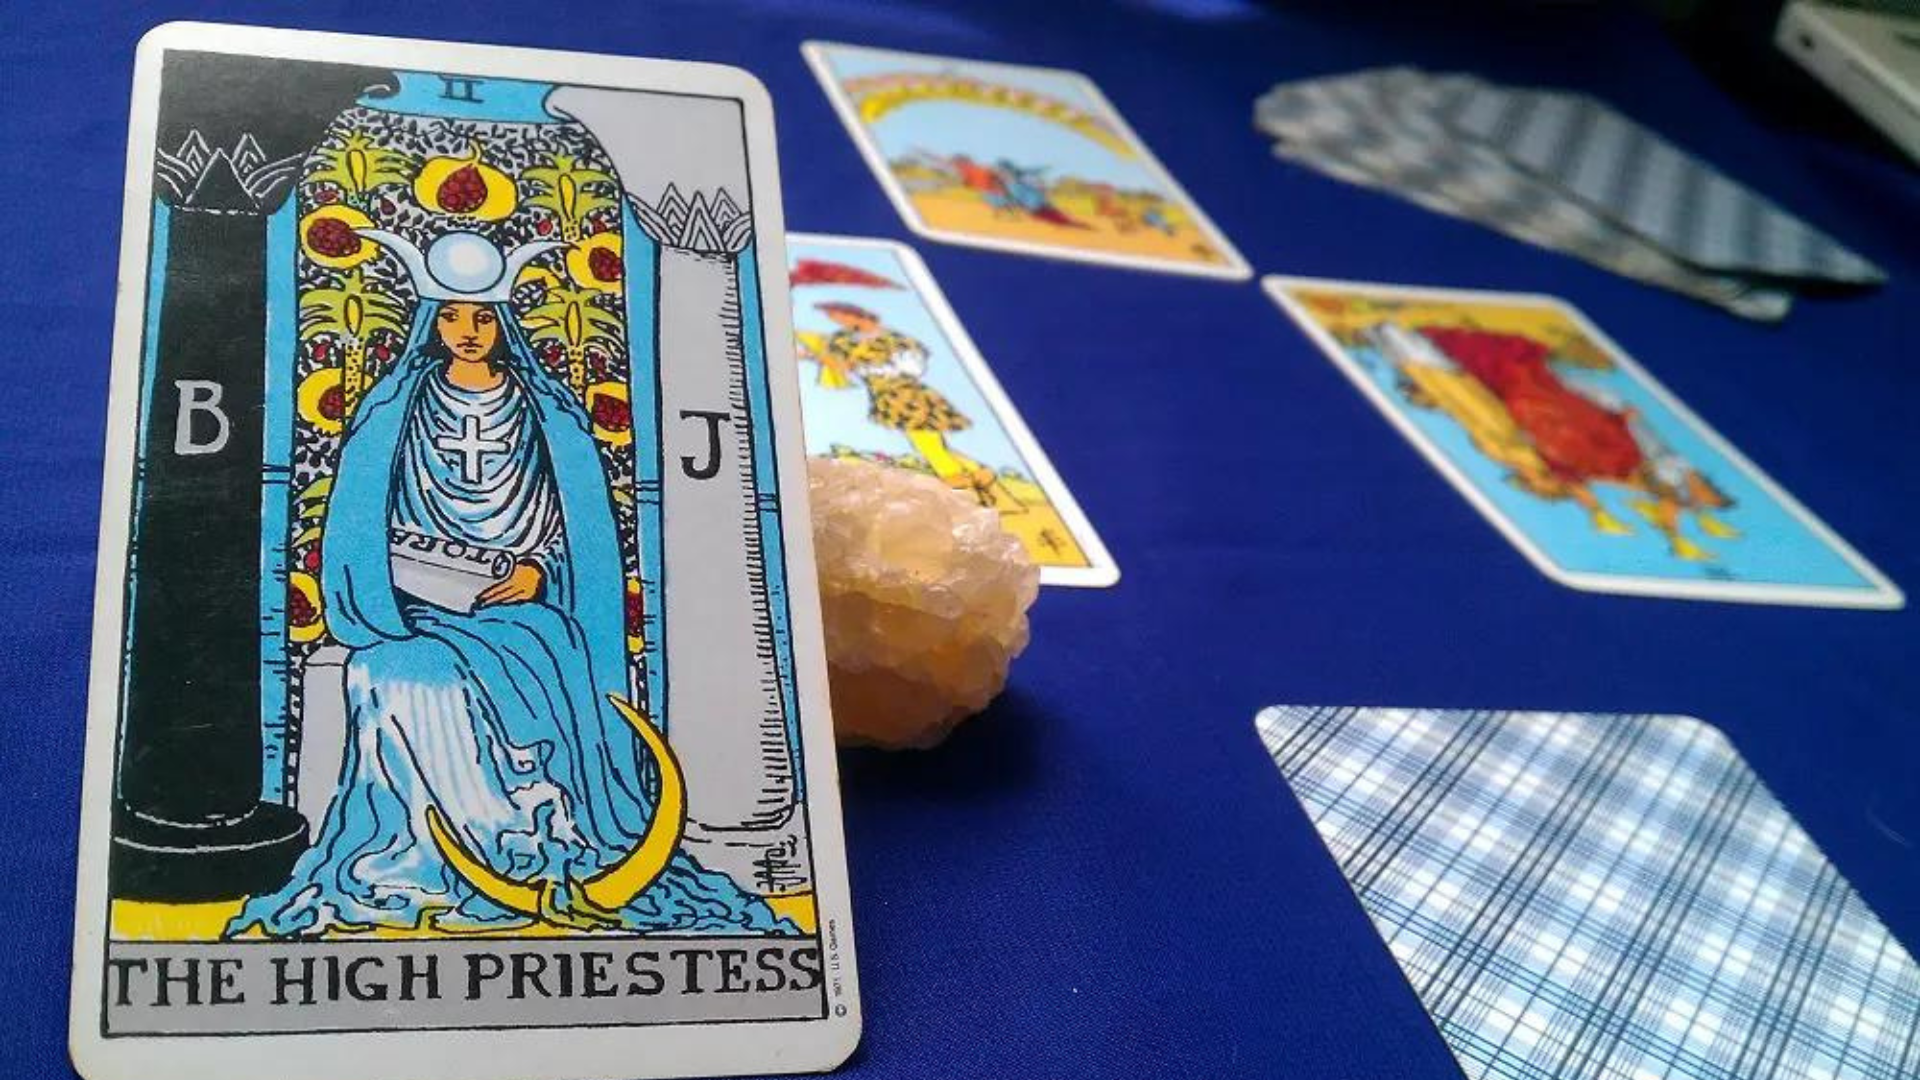 A  High Priestess Tarot Card placed on top of a blue table along with other tarot cards and a crystal